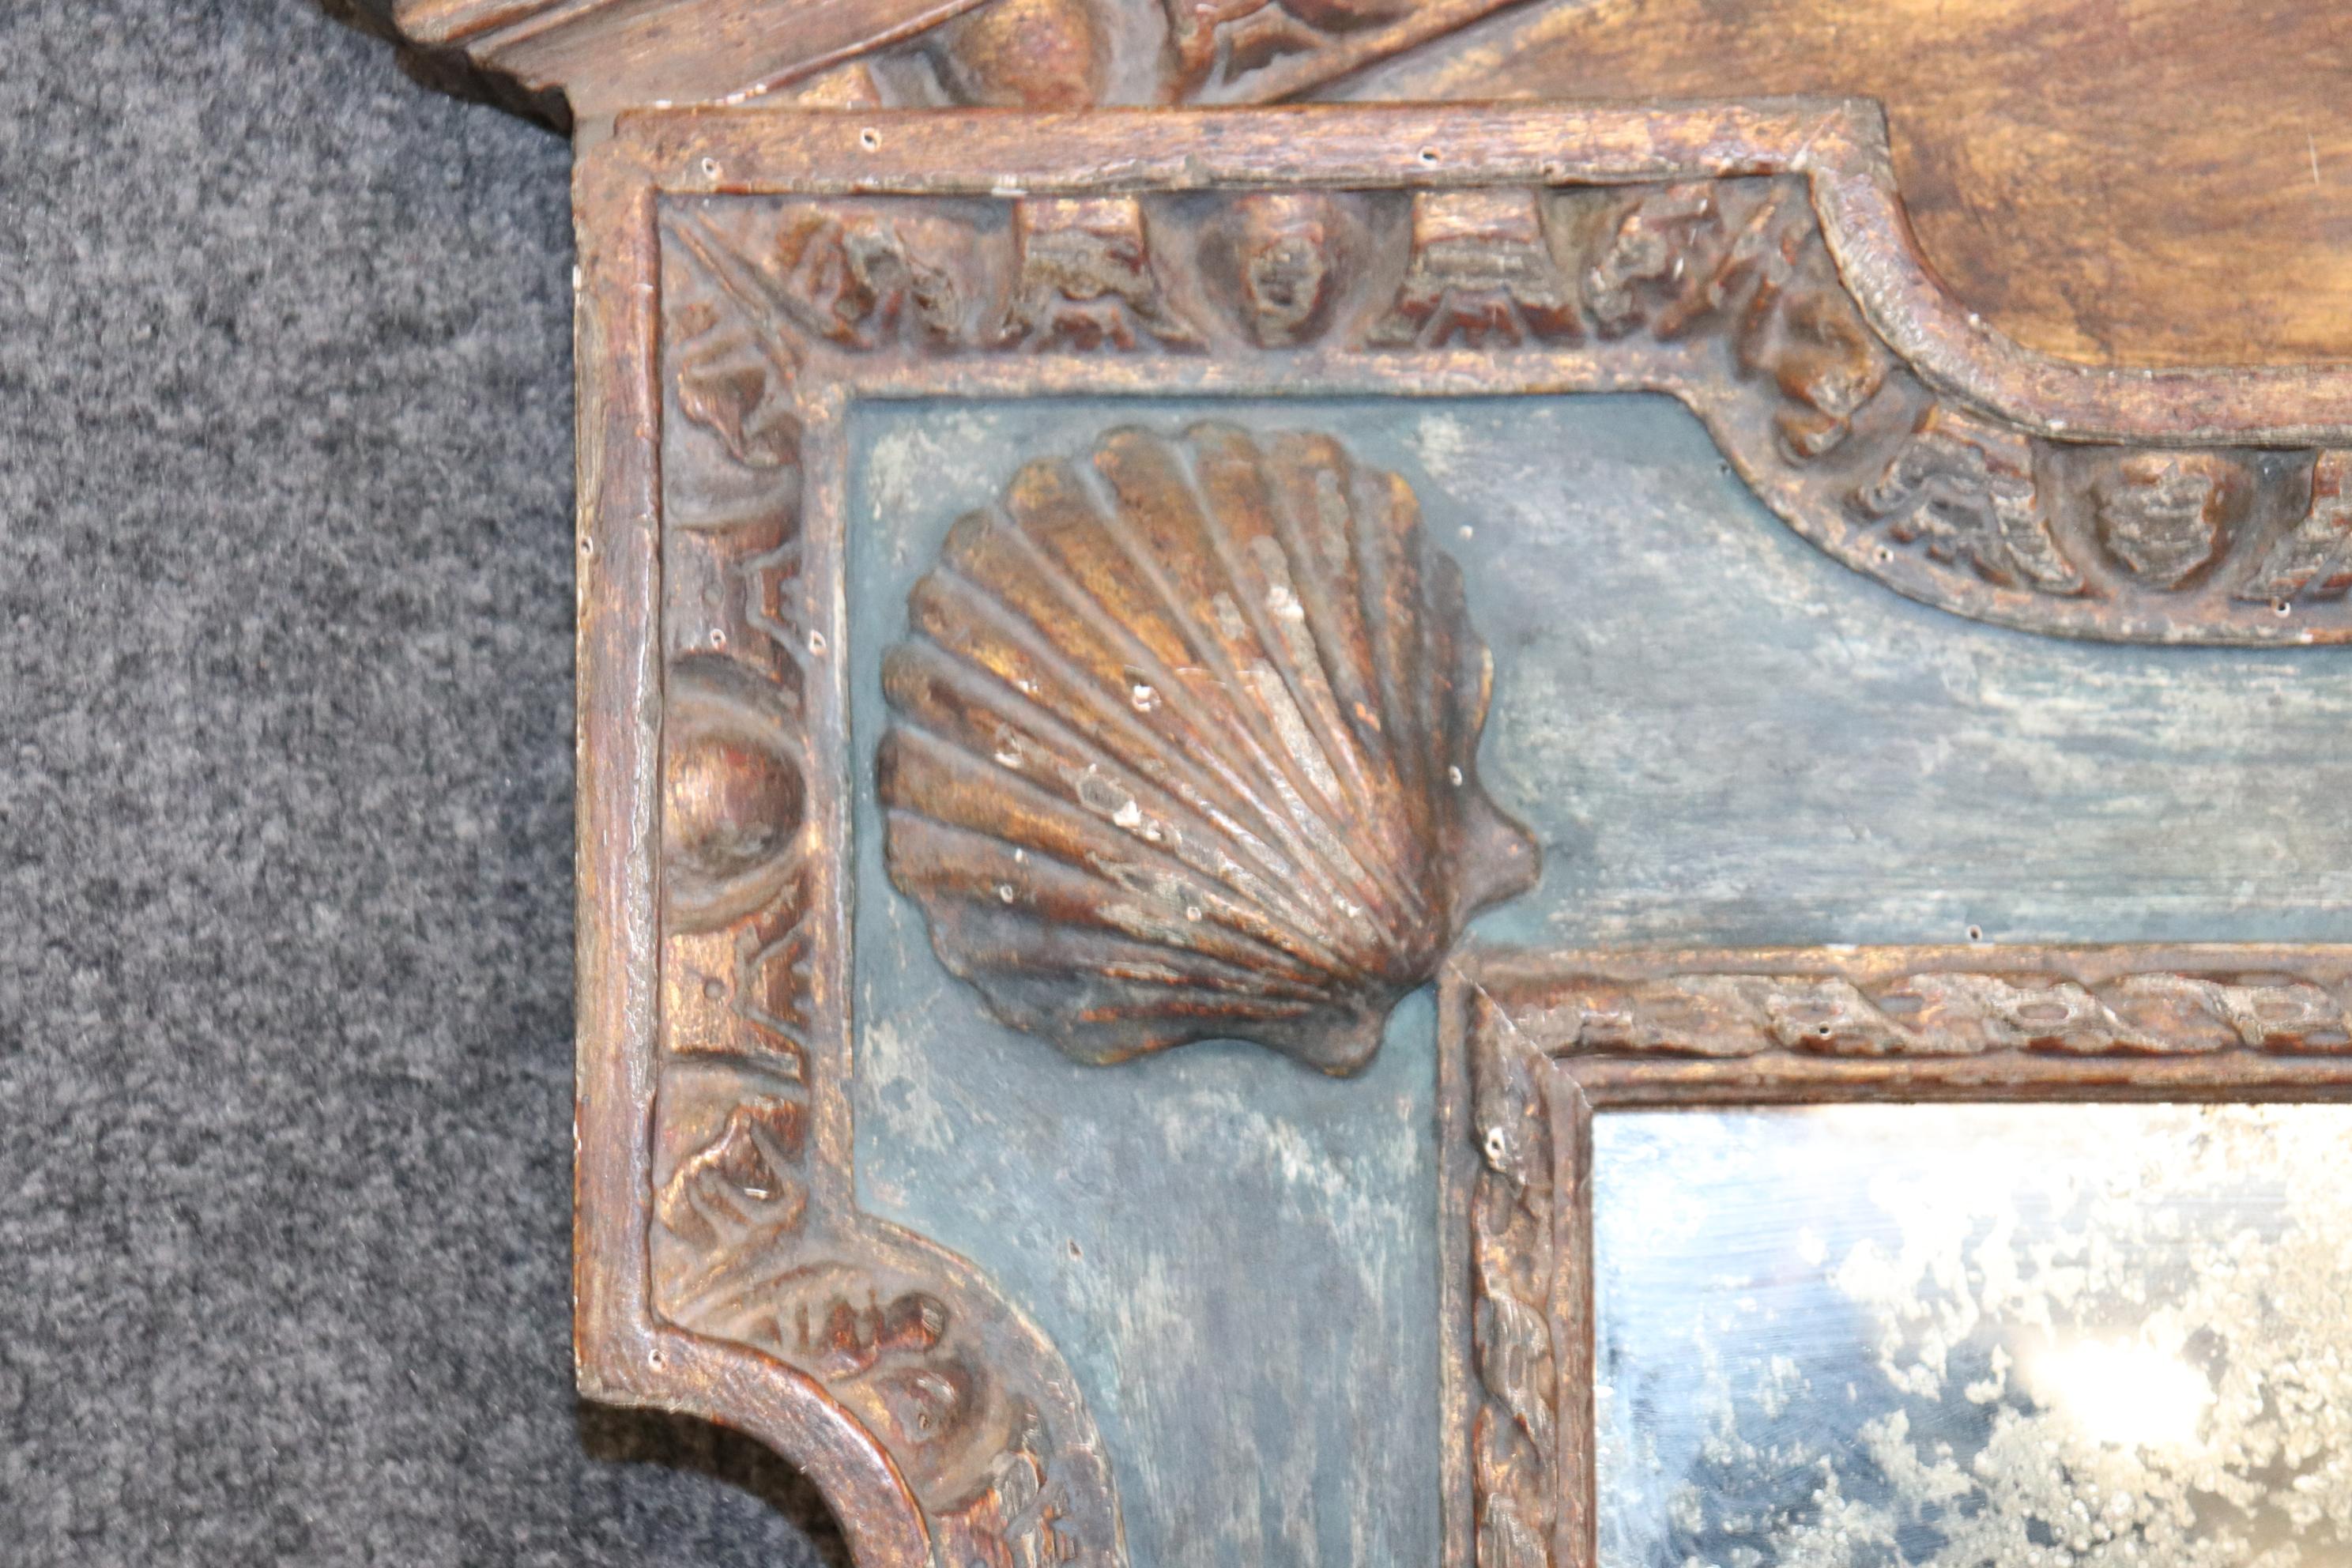 This is a fantastic mirror made in Italy that almost looks Federal, however we need to remeber that Federal designs were fashioned after Greco-Roman styling from several thousand years ago. The mirror features seashells carved at each corner and a